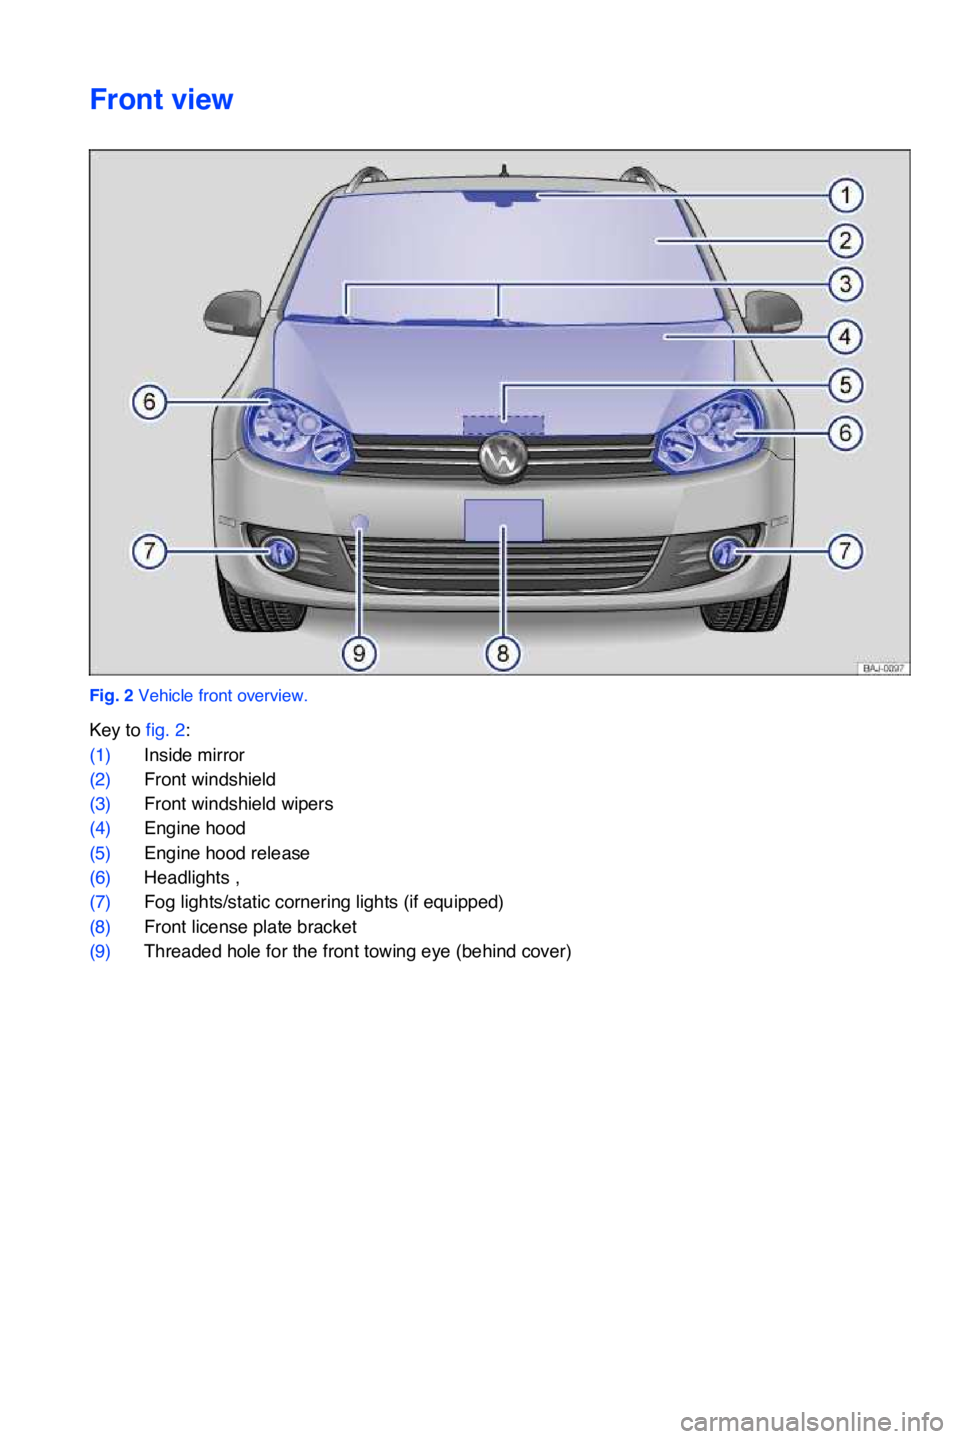 VOLKSWAGEN JETTA SPORTWAGEN 2012  Owners Manual Front view
Fig. 2 Vehicle front overview.
Key to fig. 2:
(1)Inside mirror 
(2)Front windshield
(3)Front windshield wipers 
(4)Engine hood 
(5)Engine hood release 
(6)Headlights , 
(7)Fog lights/static